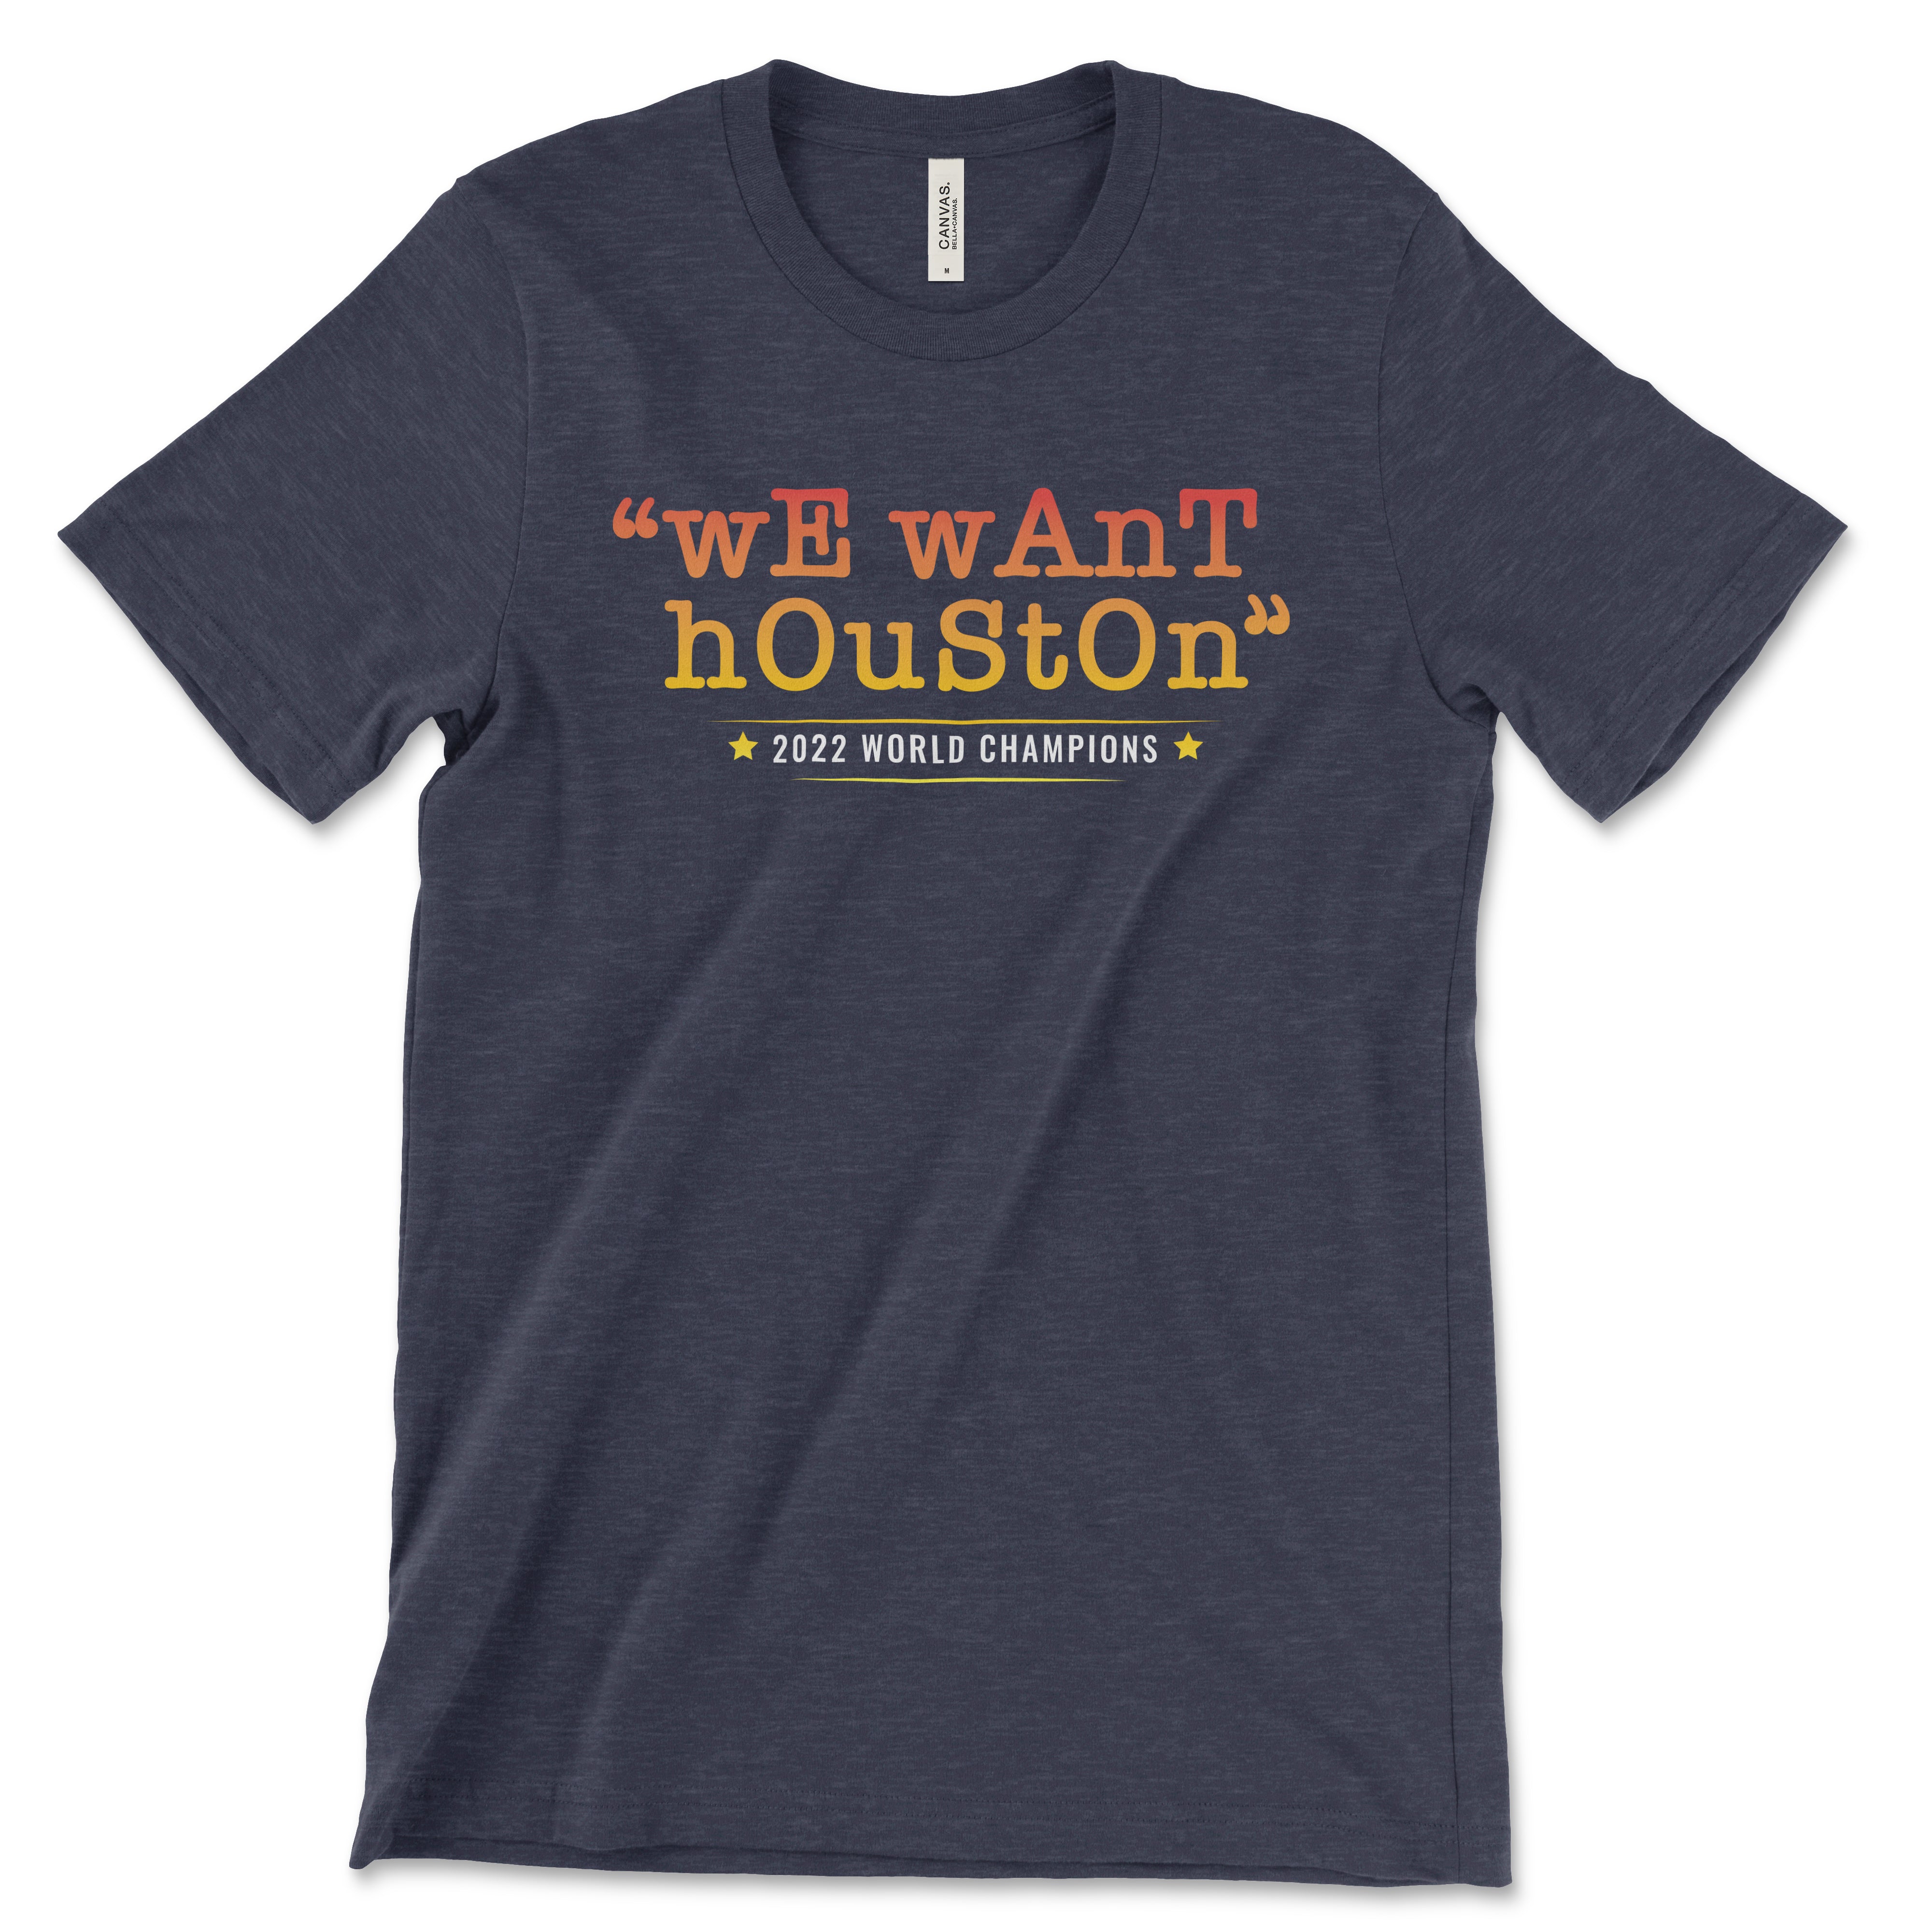 Houston Astros Texans Rockets Home Sweet Home Shirt - Bring Your